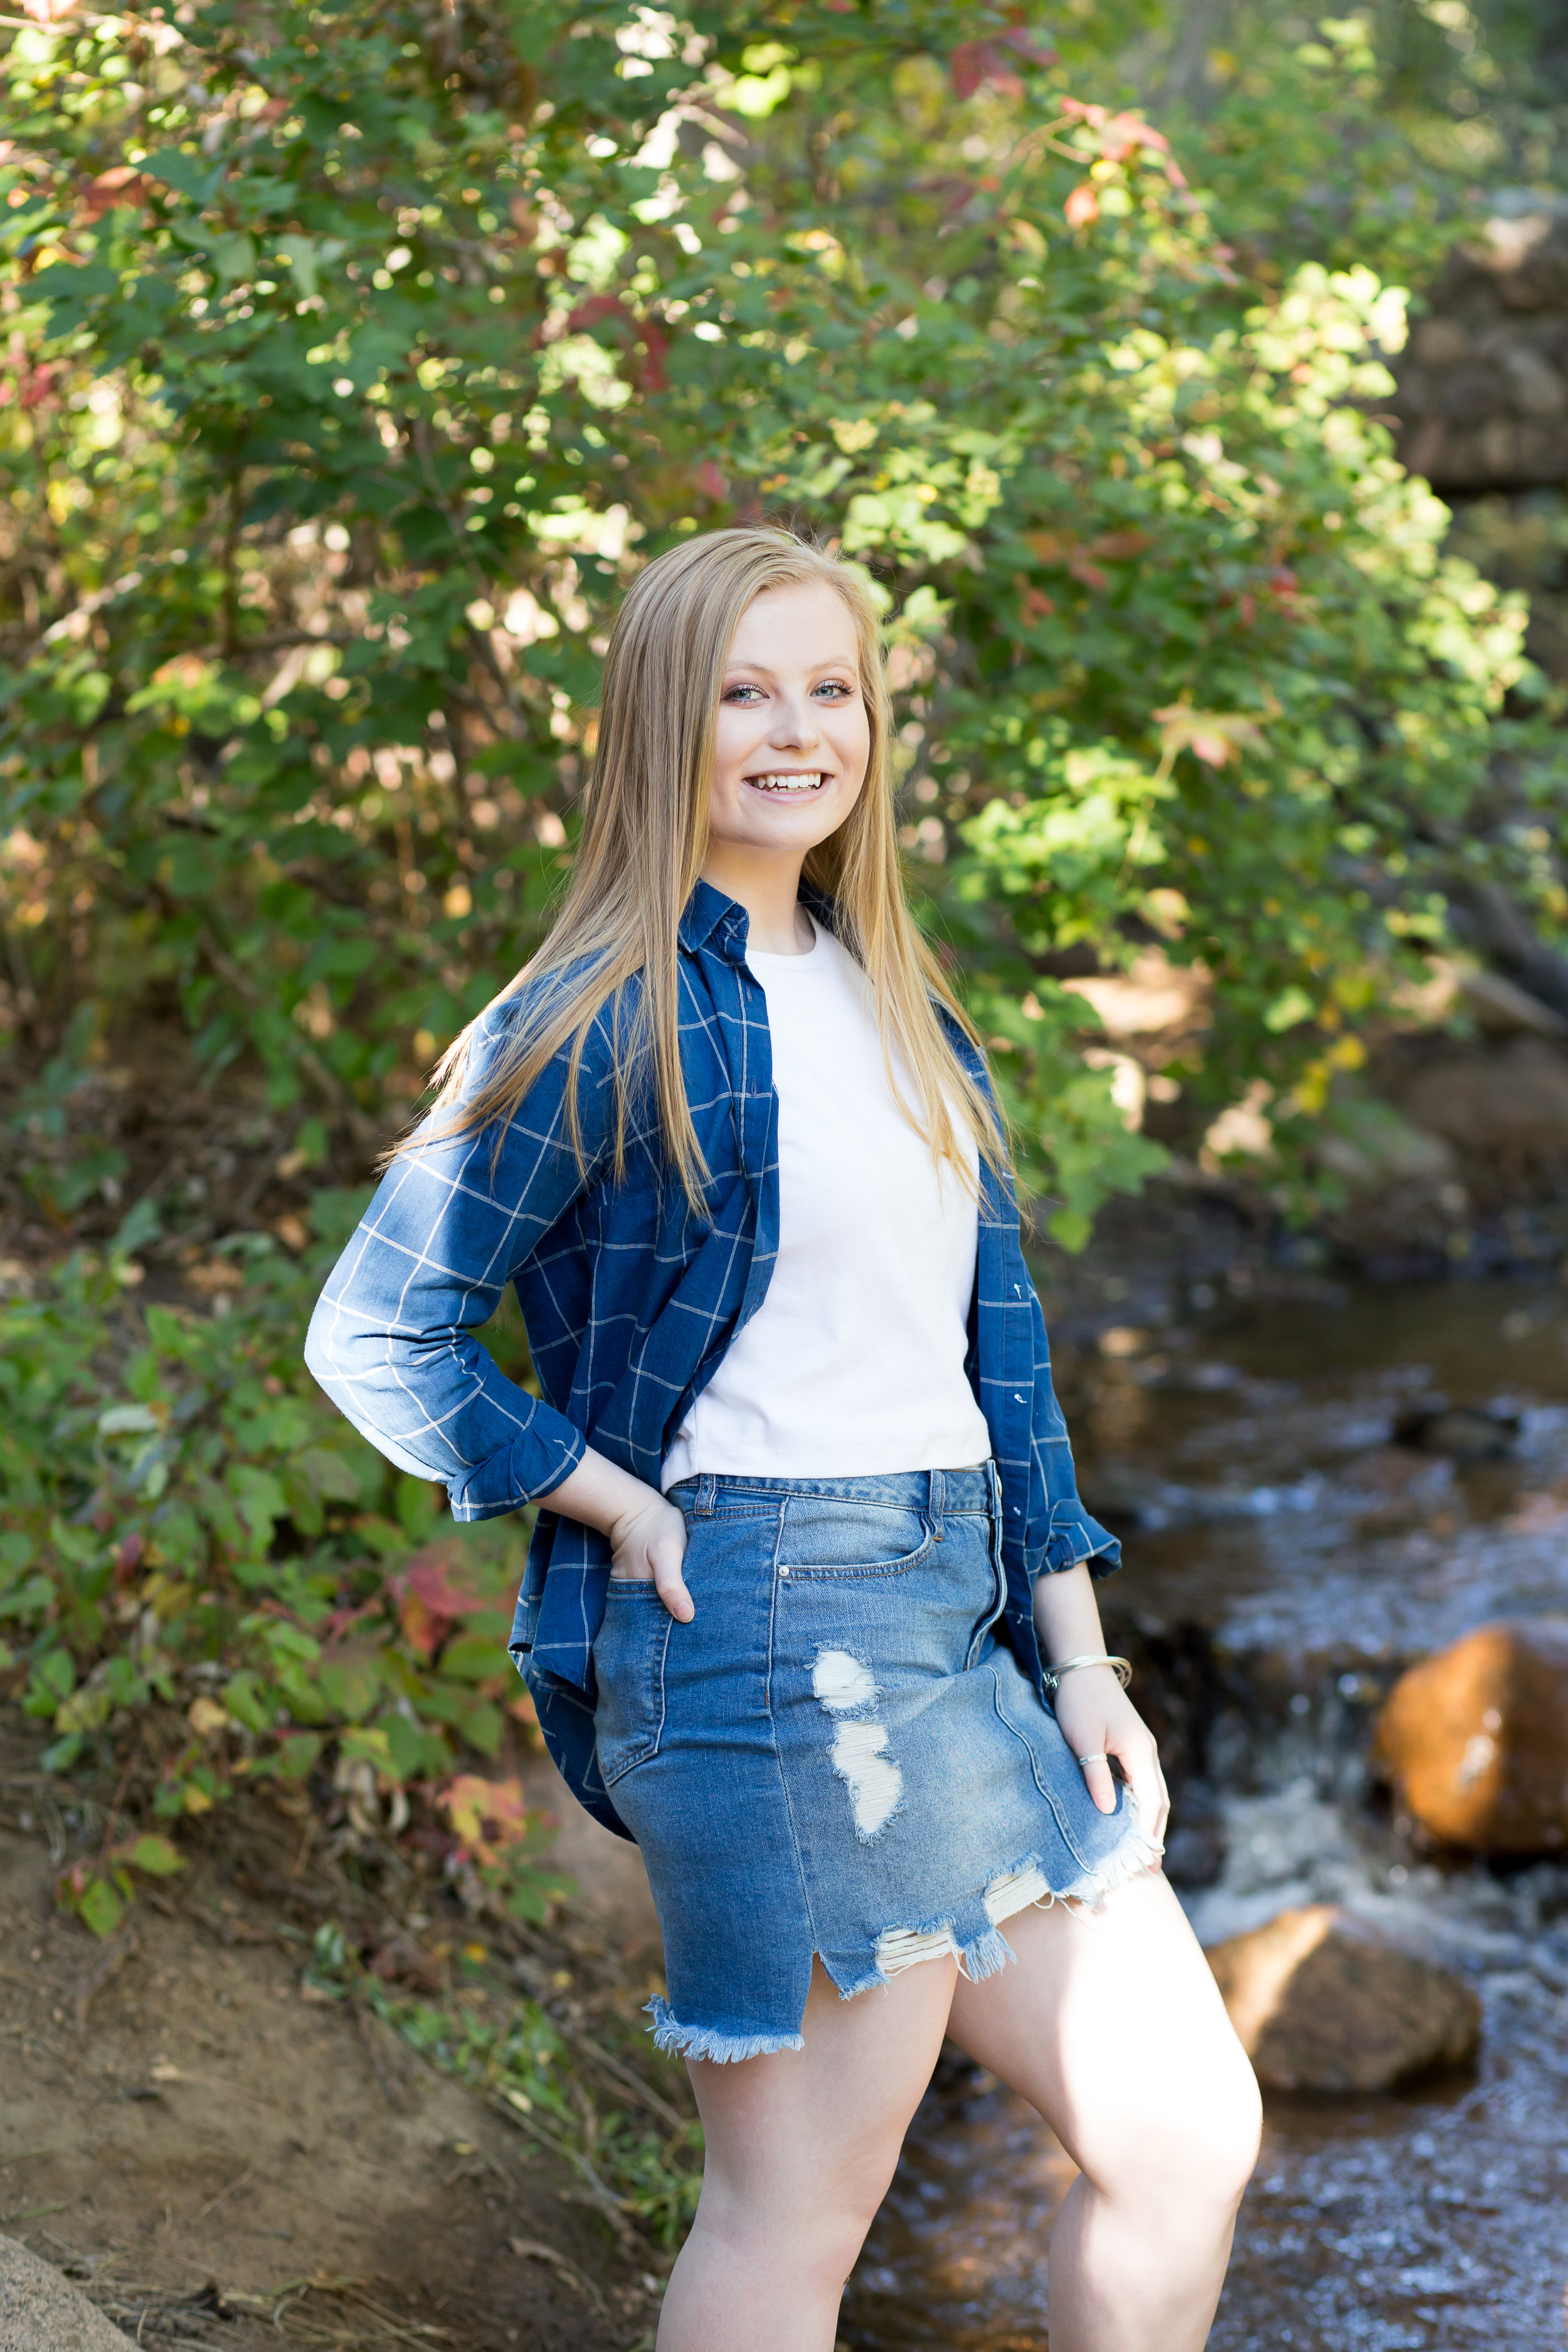 Colorado Springs Senior Photographer | Stacy Carosa Photography | Colorado Springs senior session  in Cheyenne Canyon among trees and water | Colorado Springs Senior Photographer